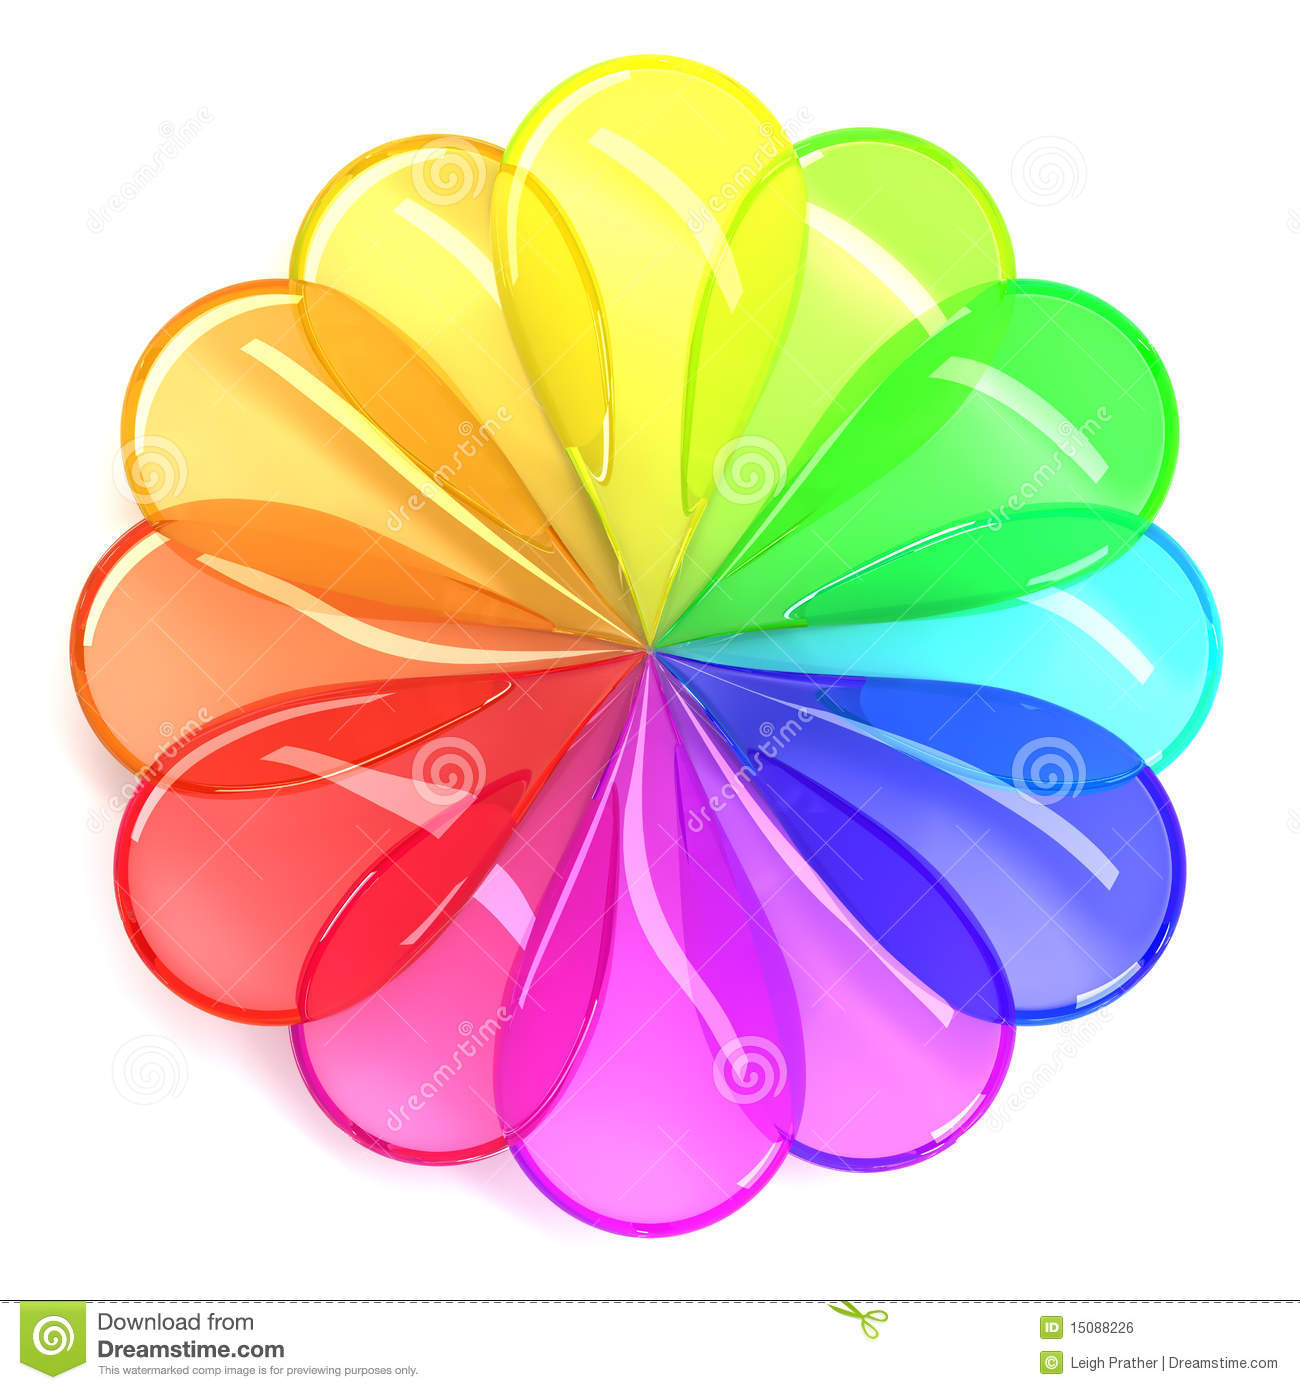 Color Wheel Royalty Free Stock Image   Image  15088226